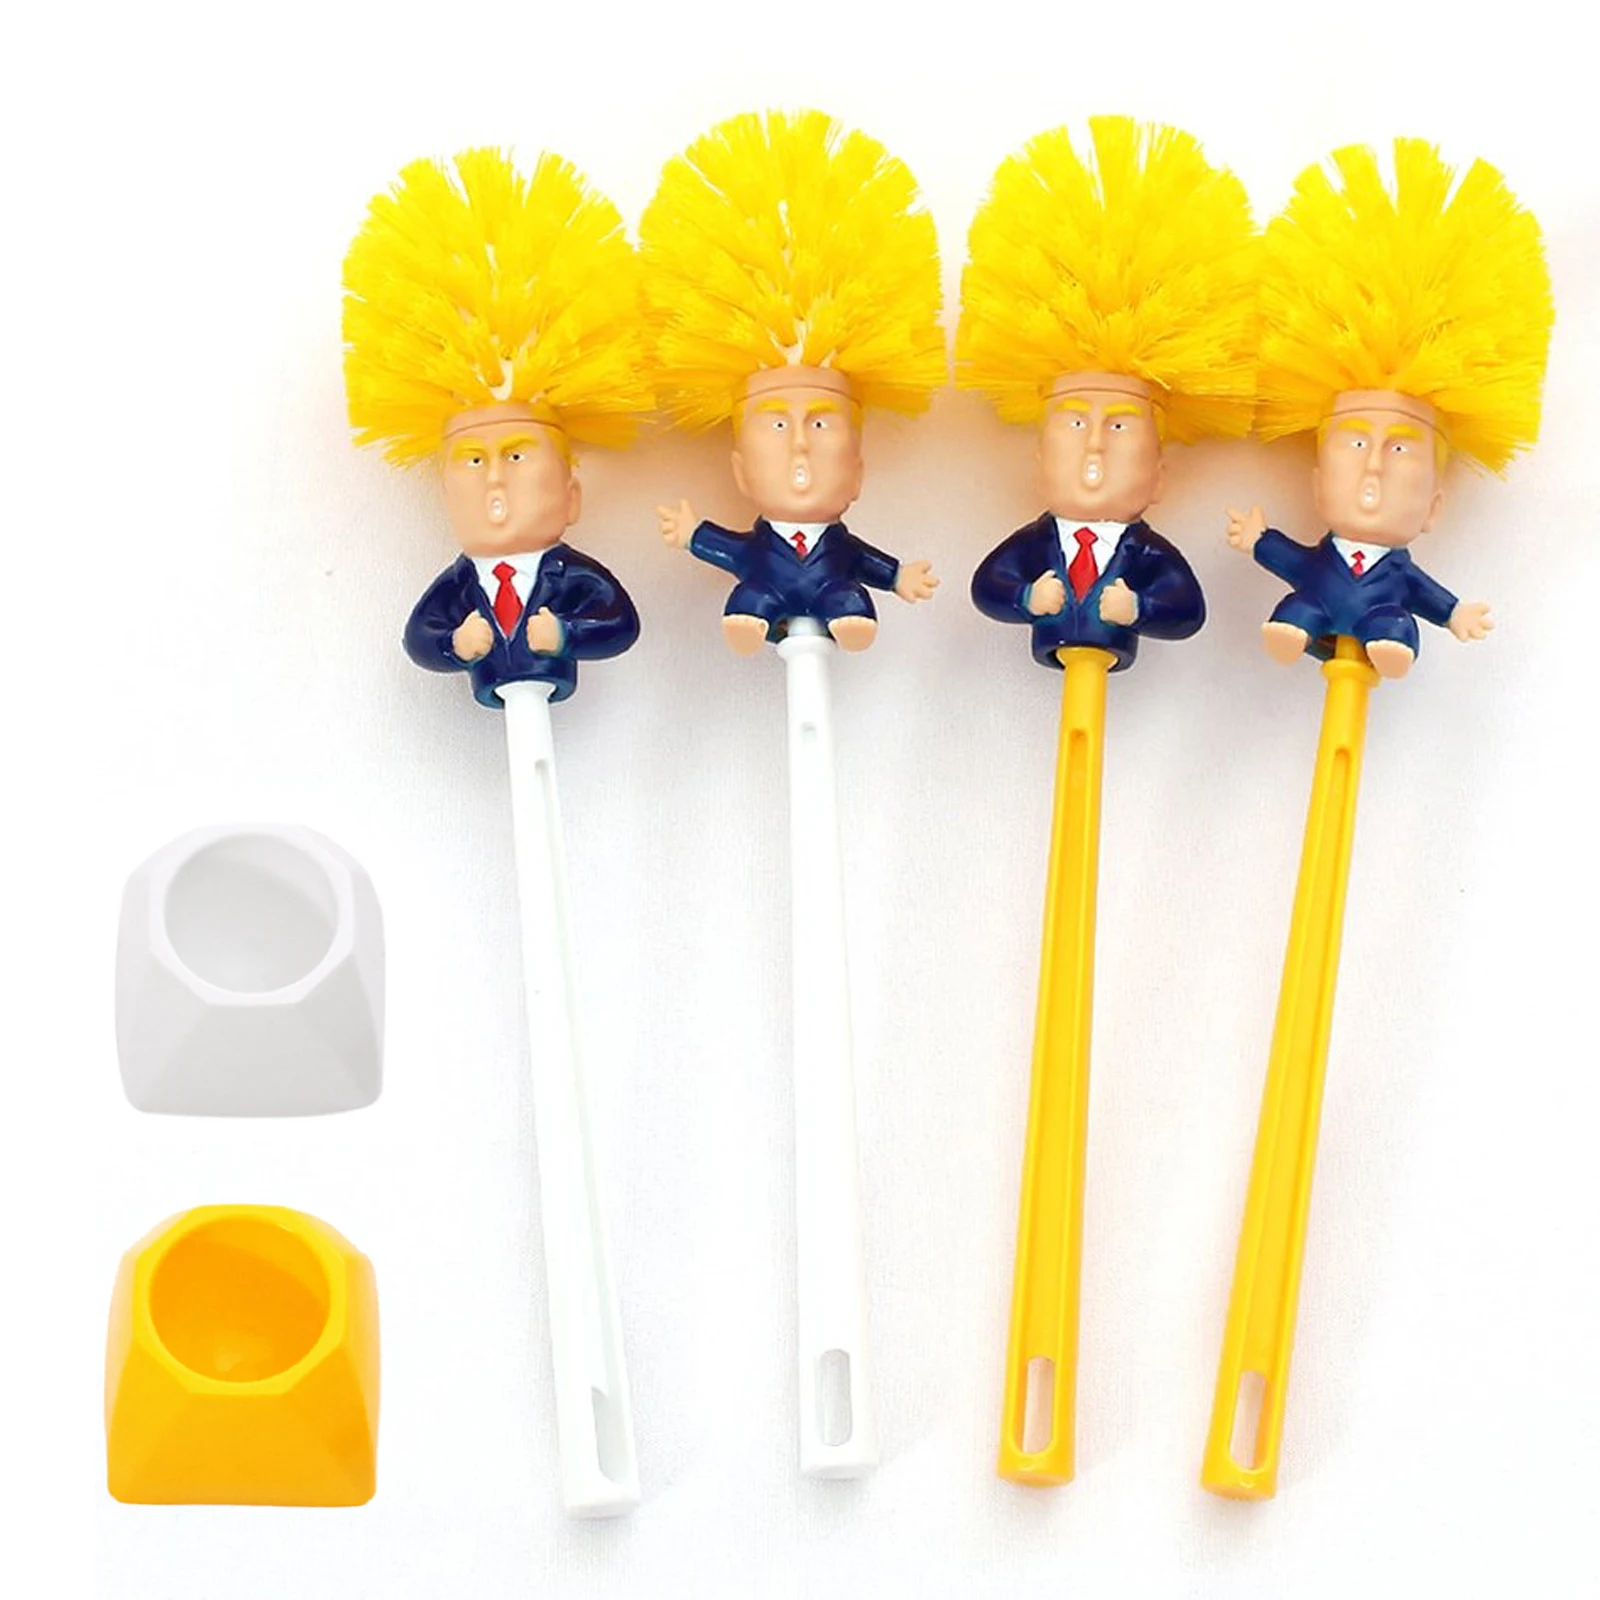 

1Pc Creative Funny plastic Trump Toilet Brush Practical Household Toilet Cleaning Tool Durable Bathroom Cleaning Accessories